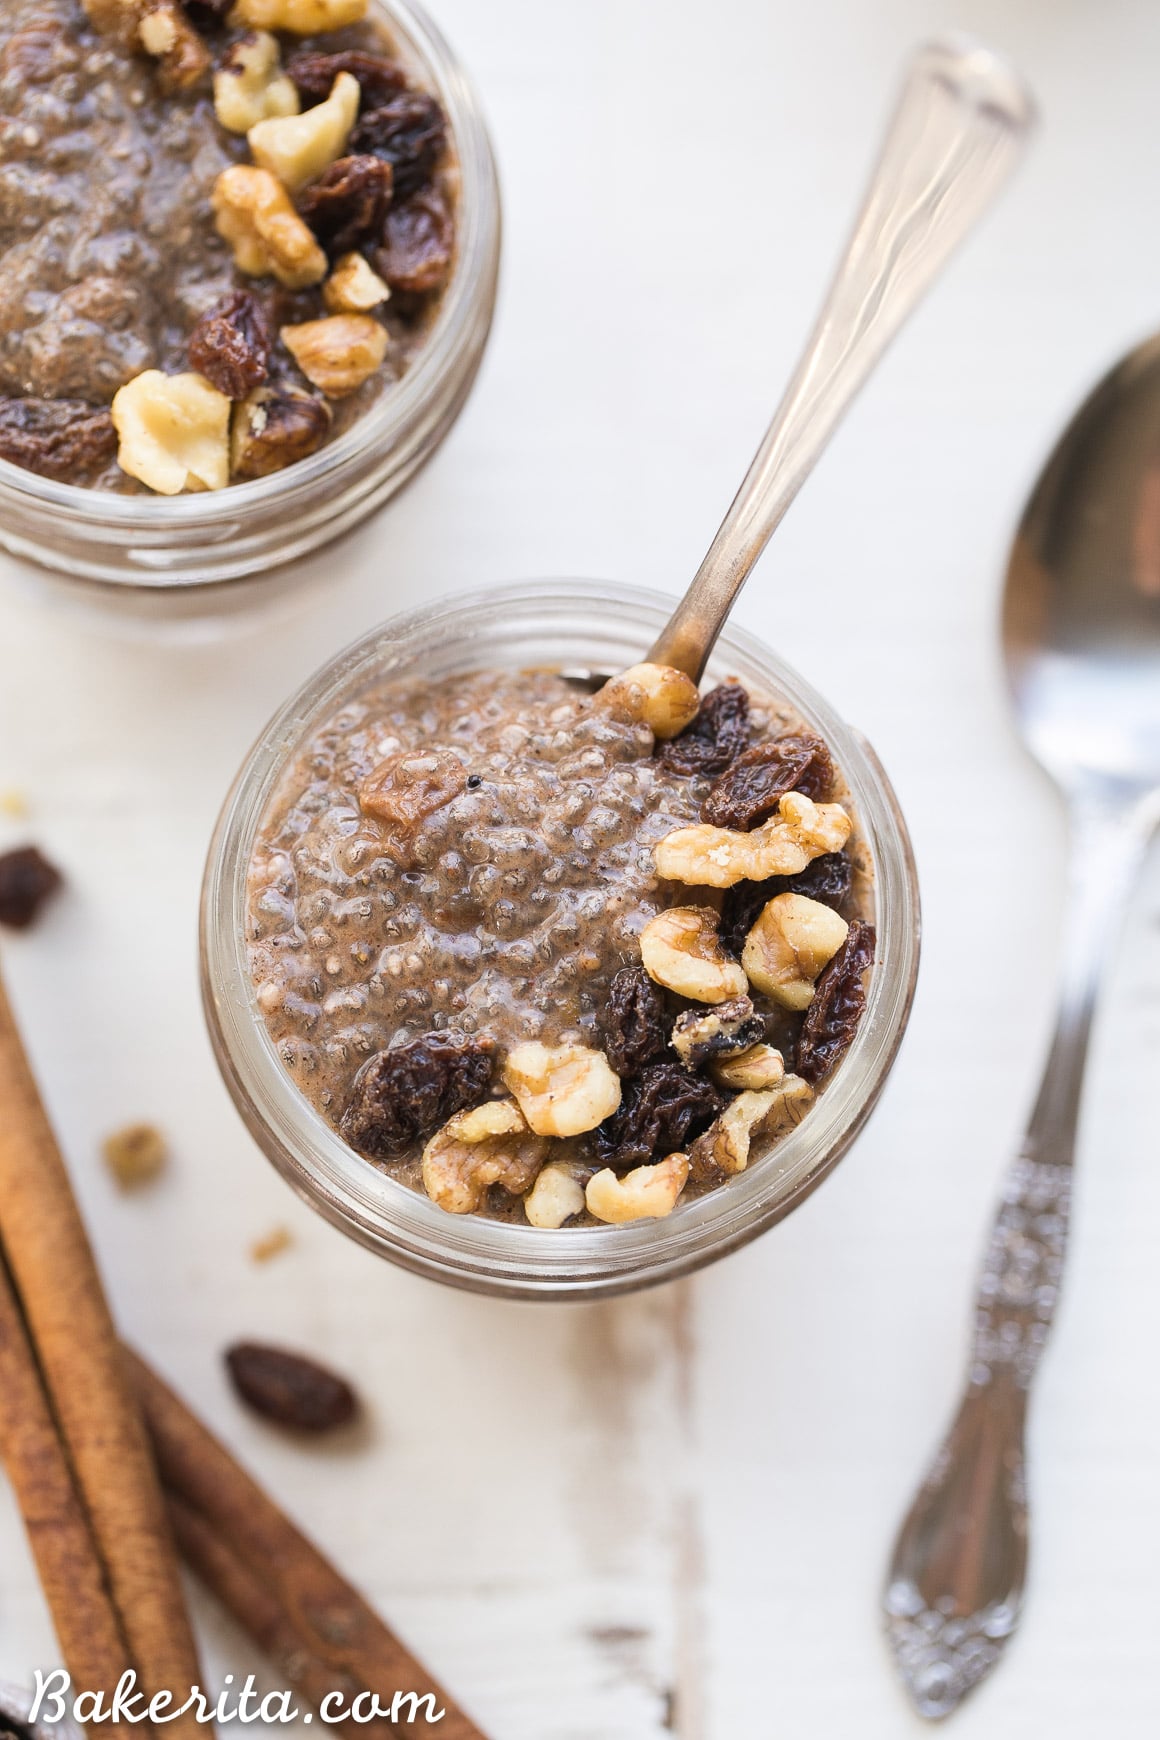 This Cinnamon Raisin Chia Pudding is an irresistibly delicious breakfast or snack made with only five ingredients and five minutes of prep. It's made with almond milk and naturally sweetened with dates, making it Paleo, vegan, and Whole30-compliant.